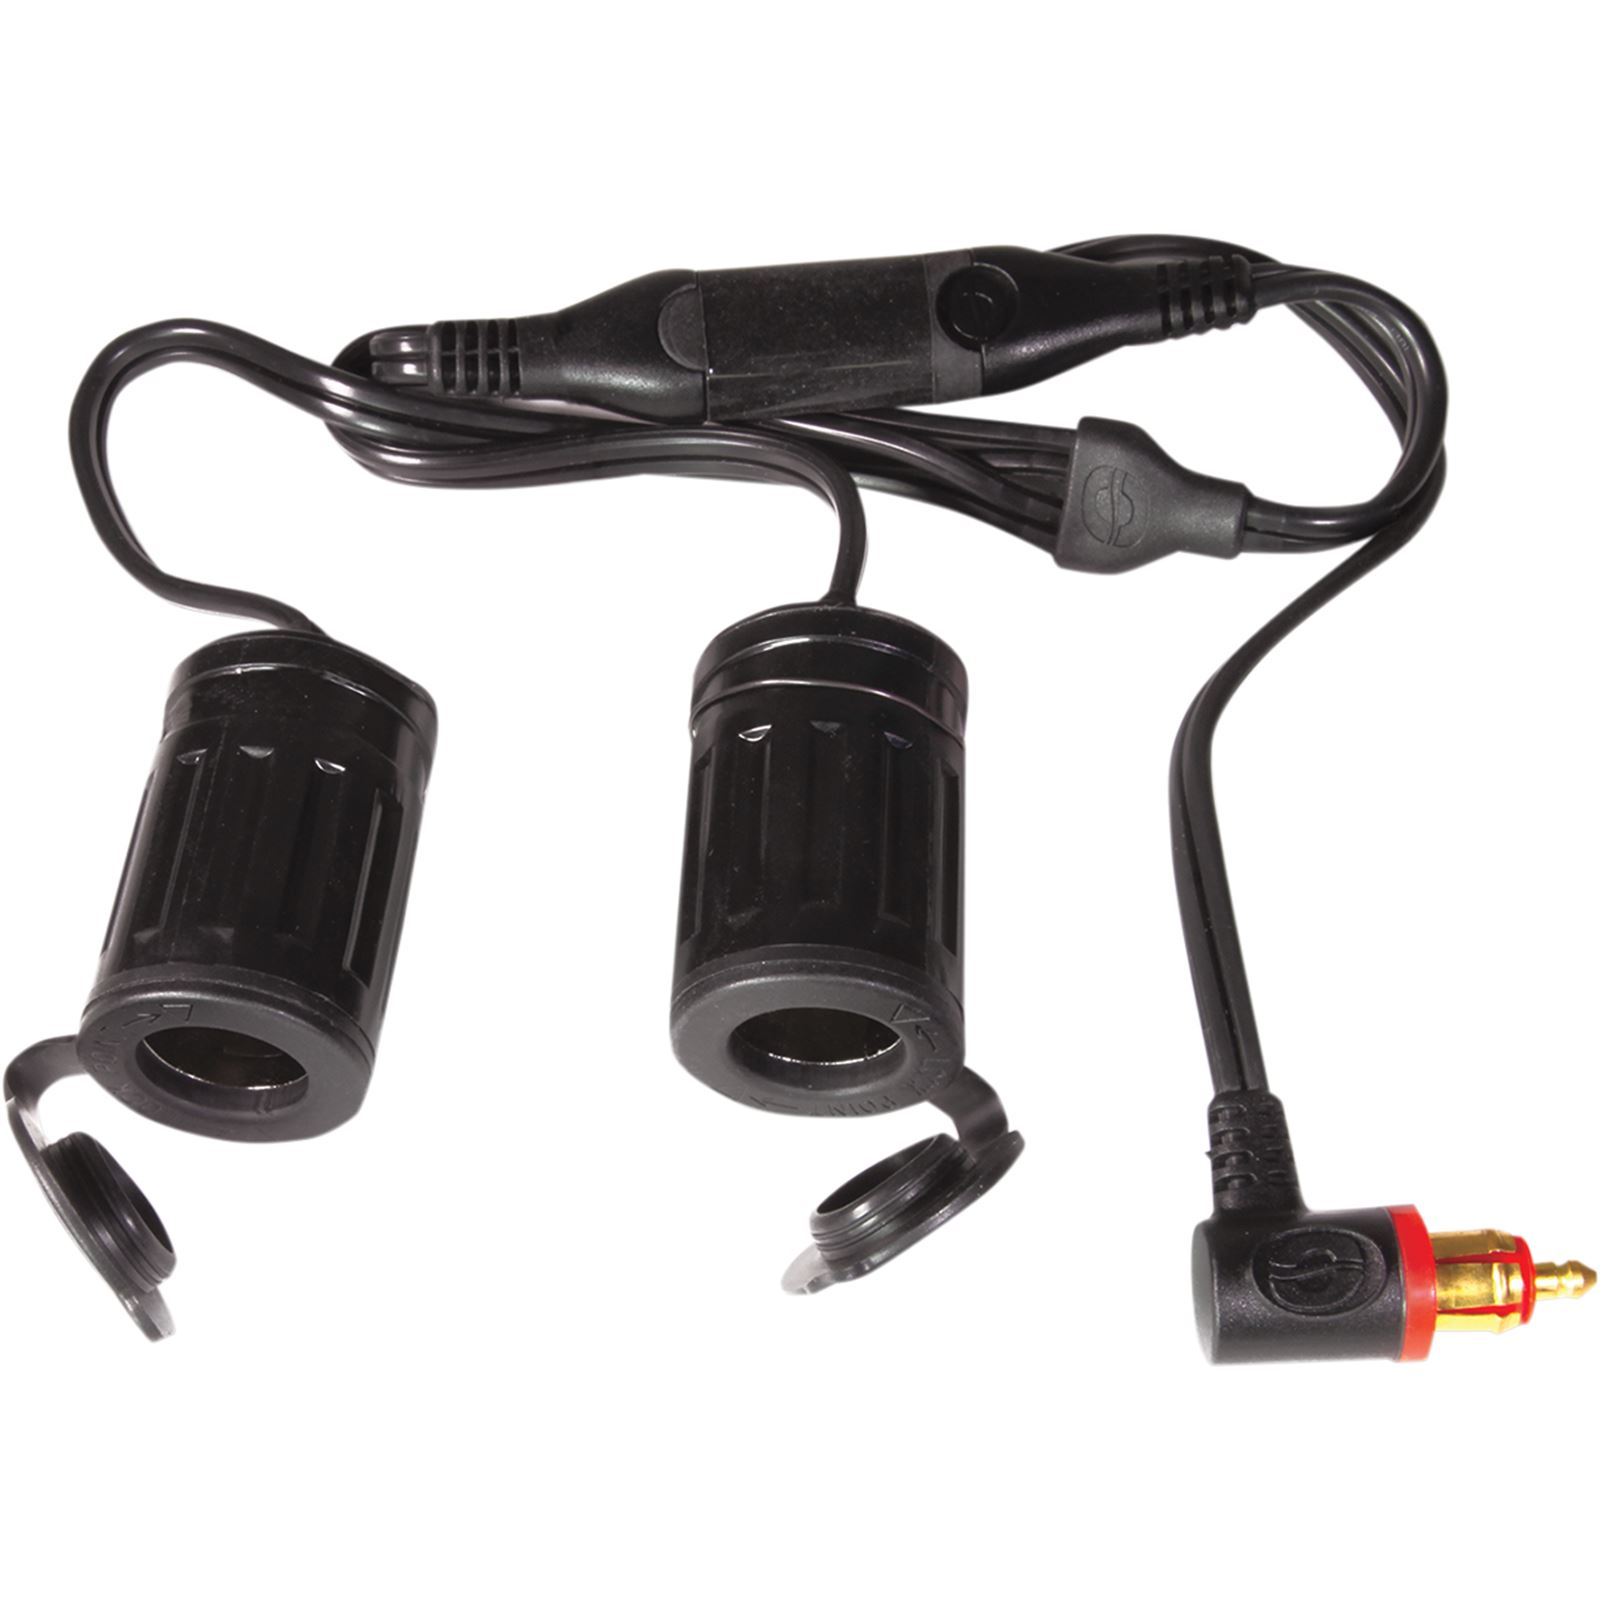 Tecmate Charger Cord - DIN to Dual Socket Splitter Adapter